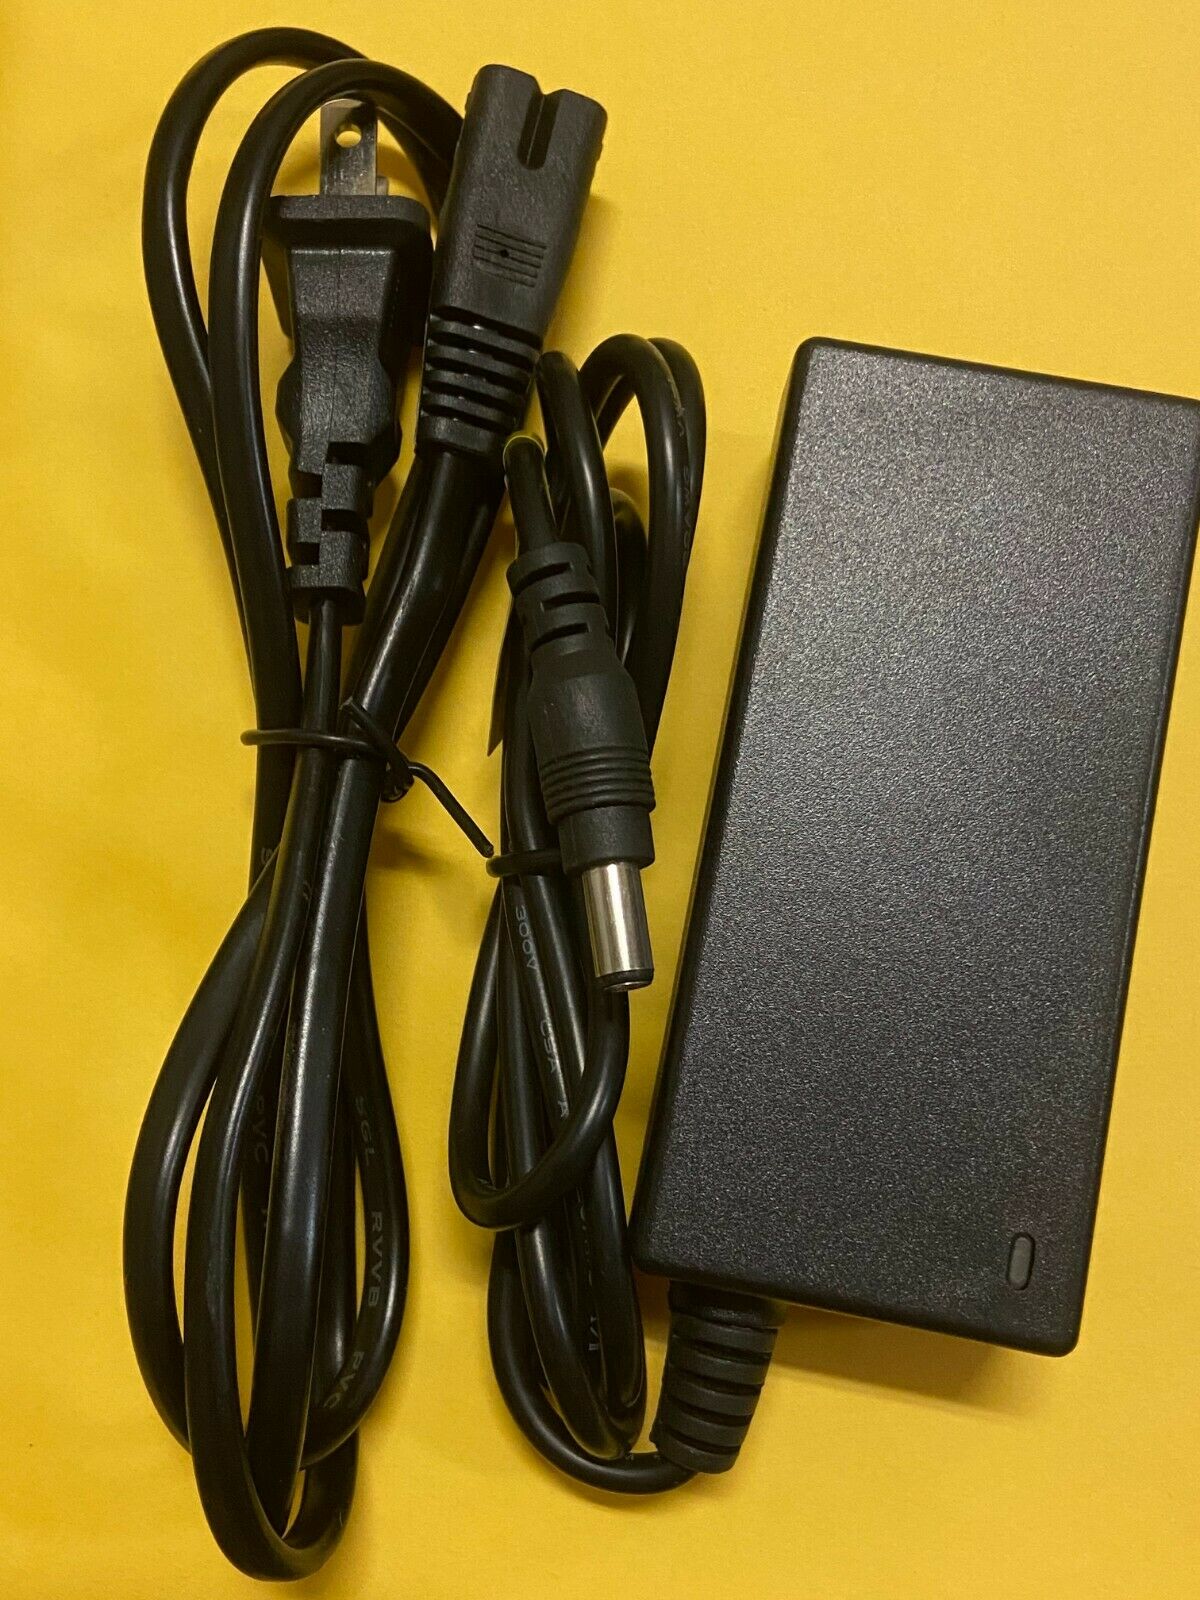 NEW AC-DC Adapter For Onkyo LS-T10 LST10 3D TV Power Supply Cord Battery Charger Technical Specifications: 1 AC input